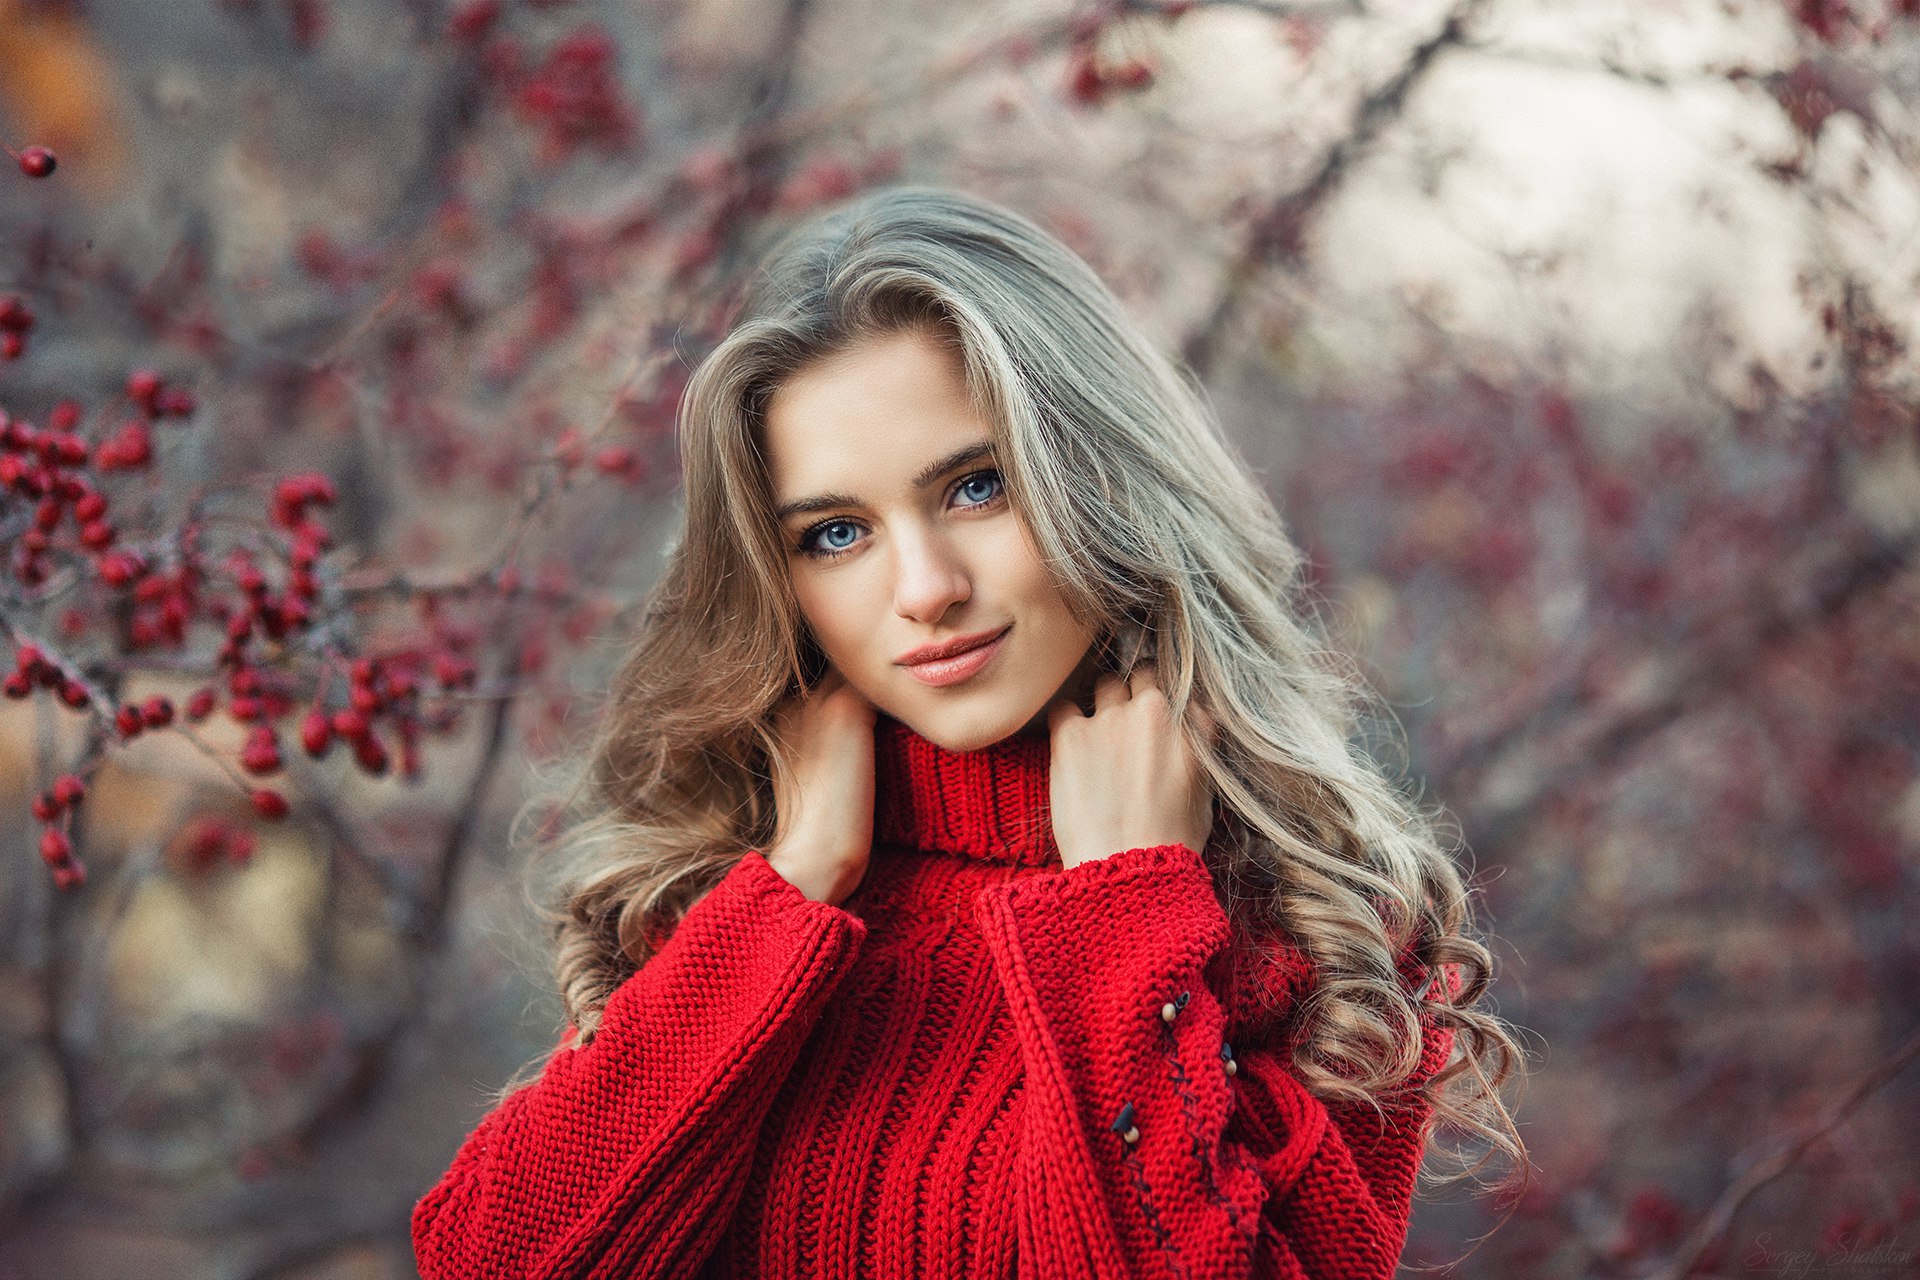 A girl in a red turtleneck poses against the background of a tree with rowanberries